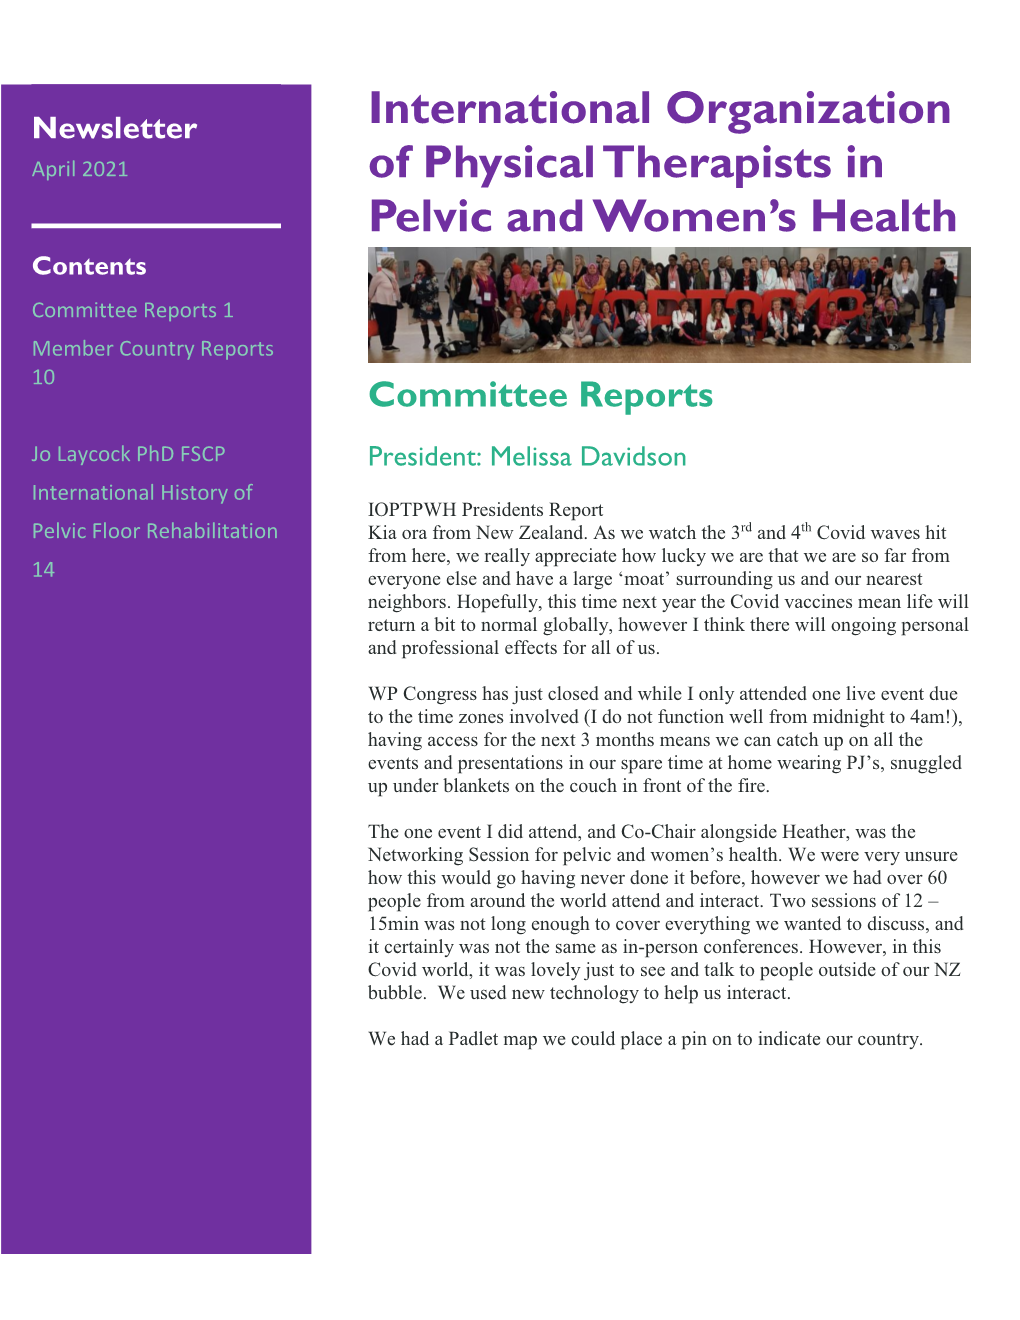 International Organization of Physical Therapists in Pelvic and Women's